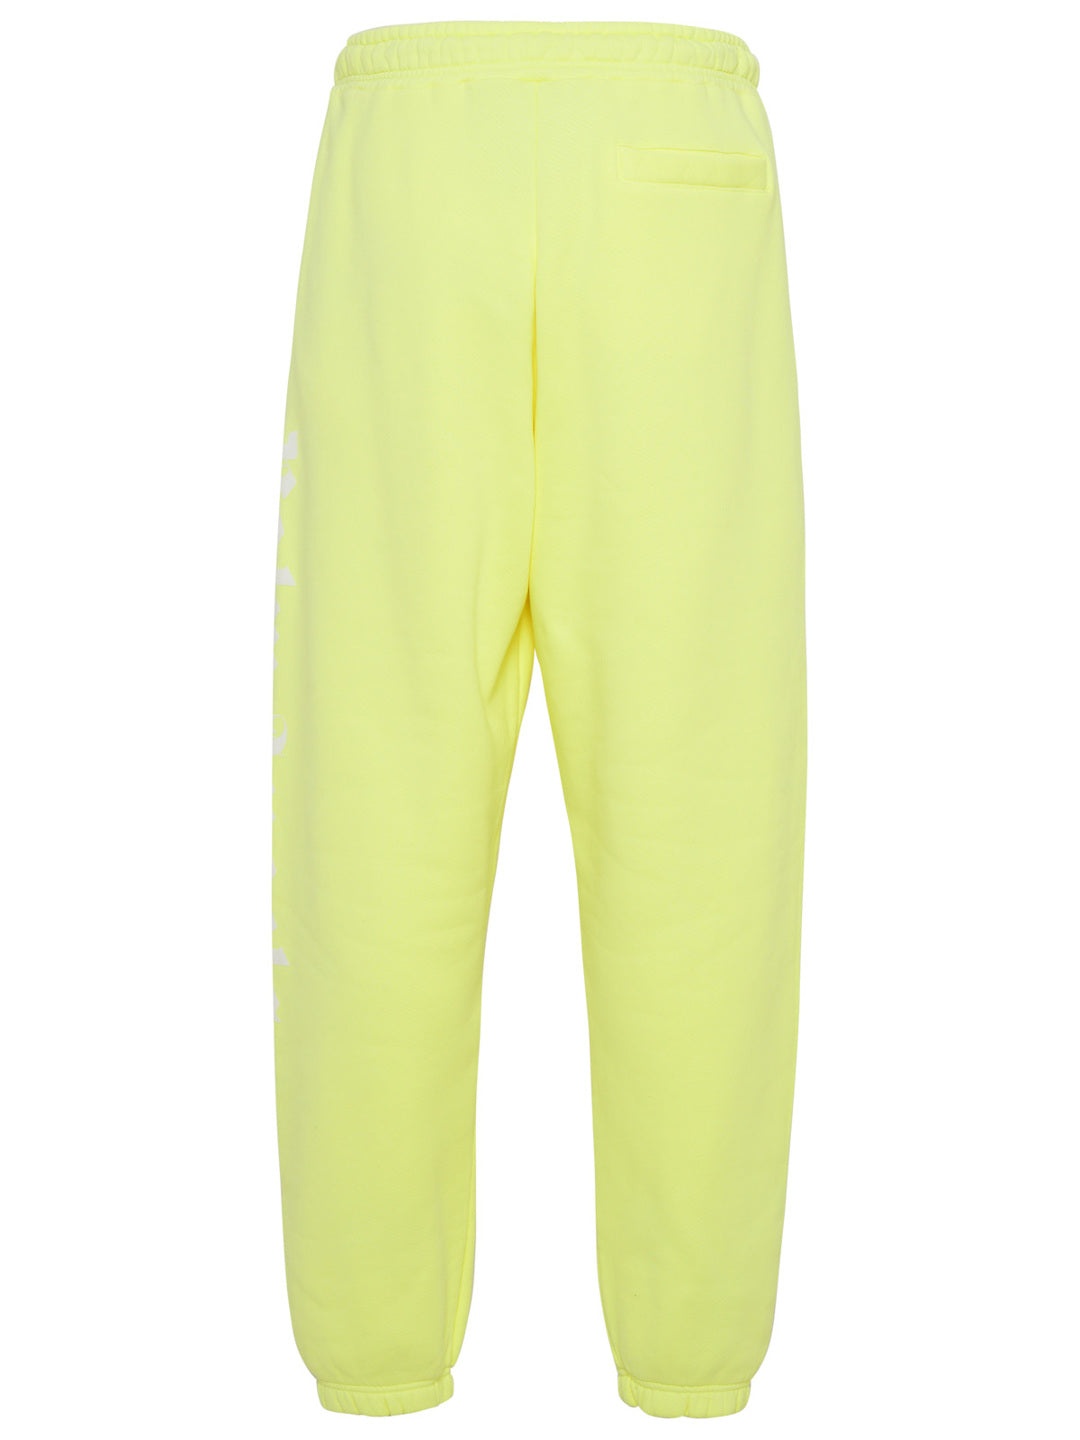 PALM ANGELS Neon Yellow Cotton Track Suit Pants - 3